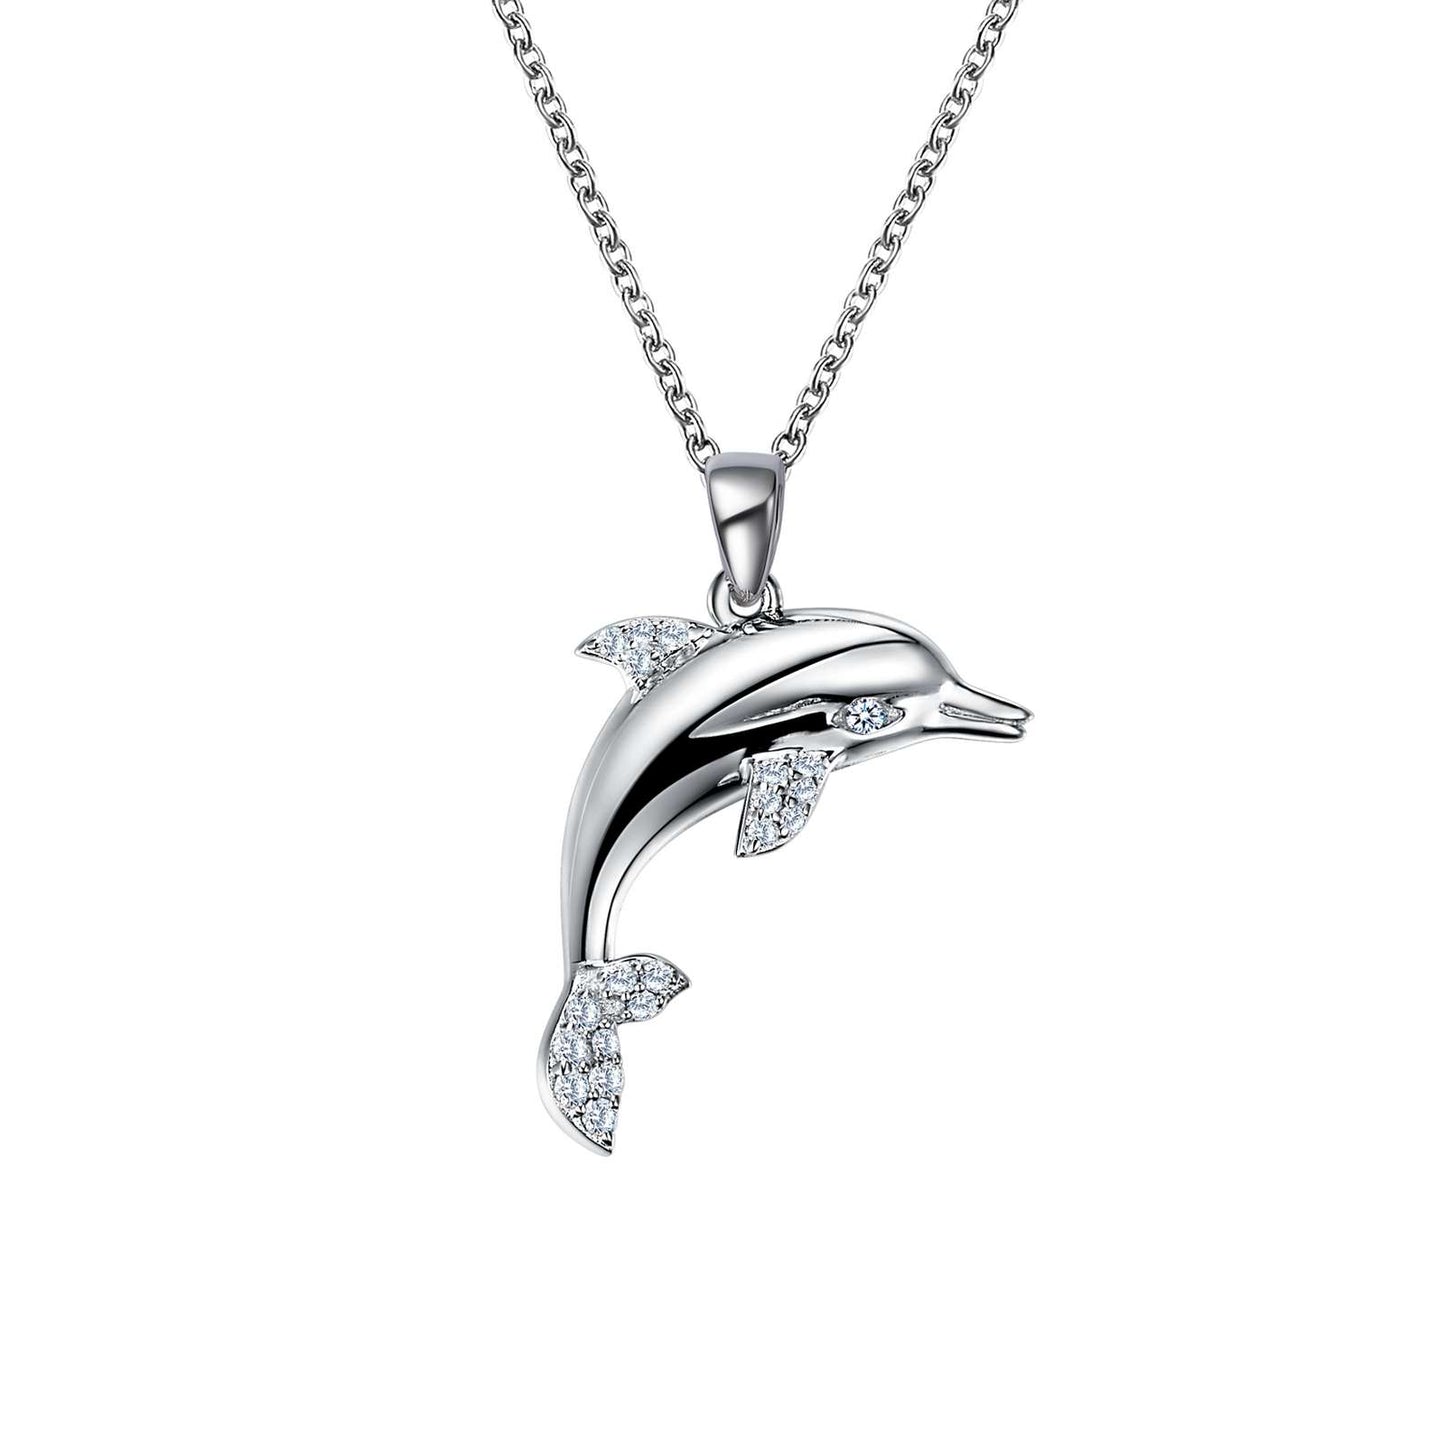 Leaping Dolphin Necklace